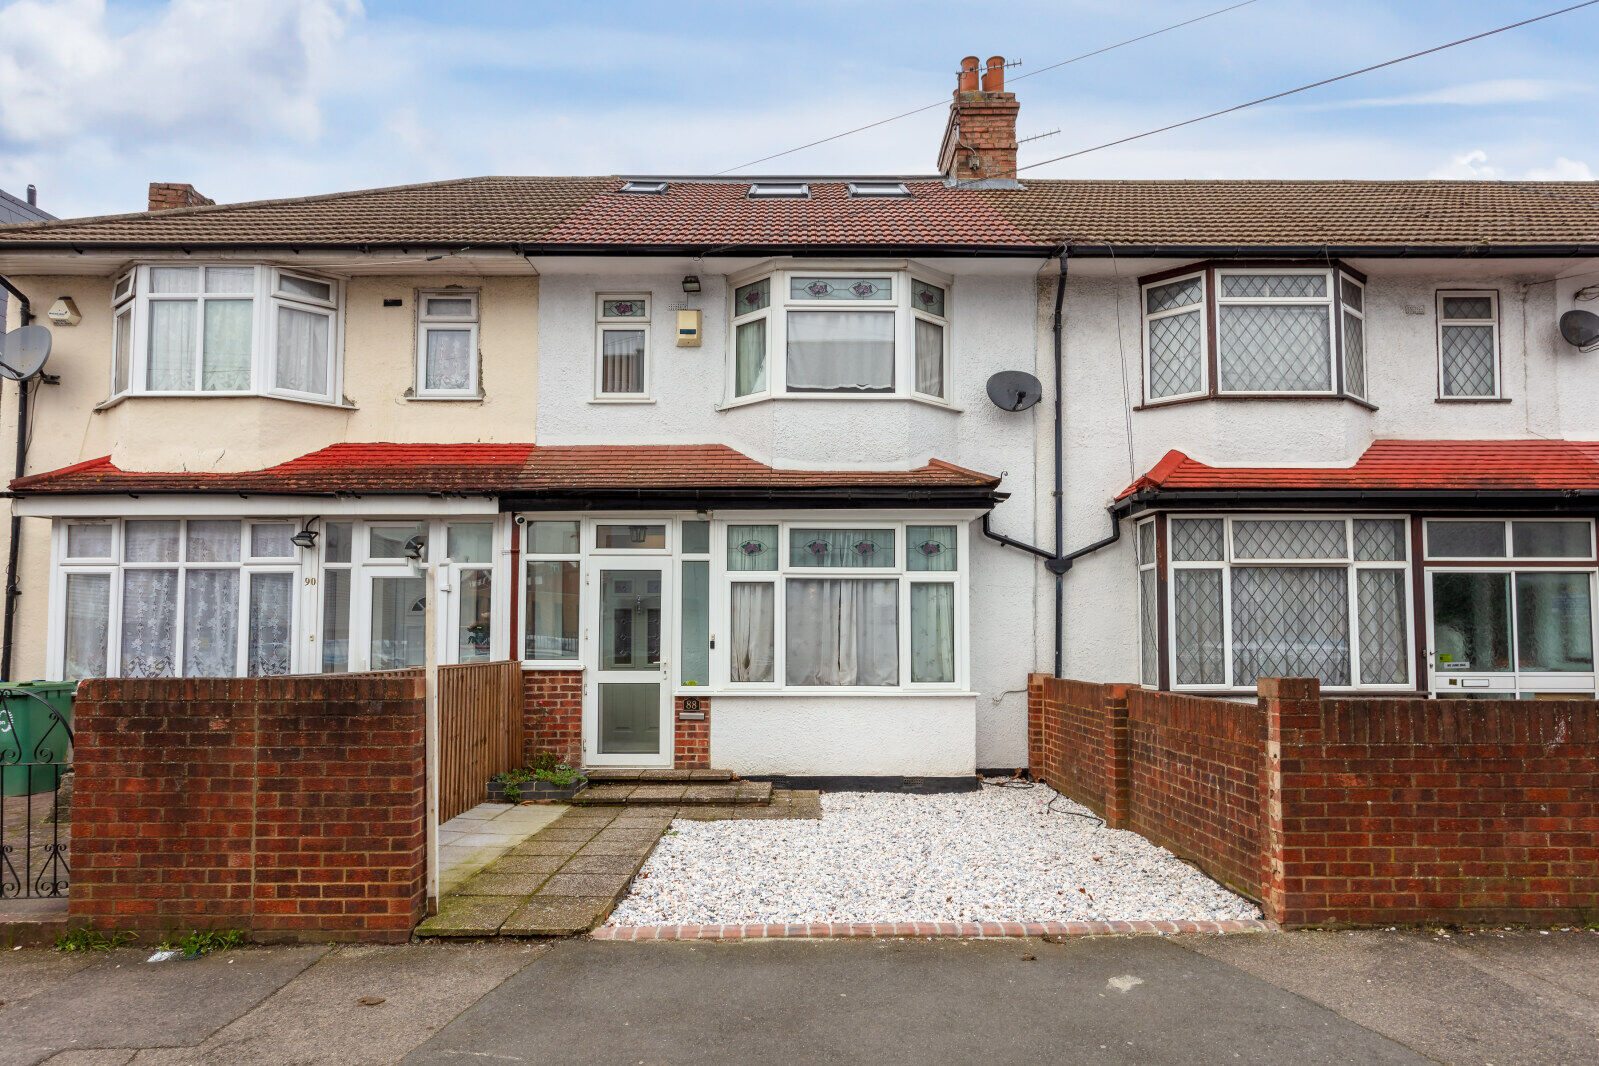 5 bedroom mid terraced house for sale Bond Road, Mitcham, CR4, main image